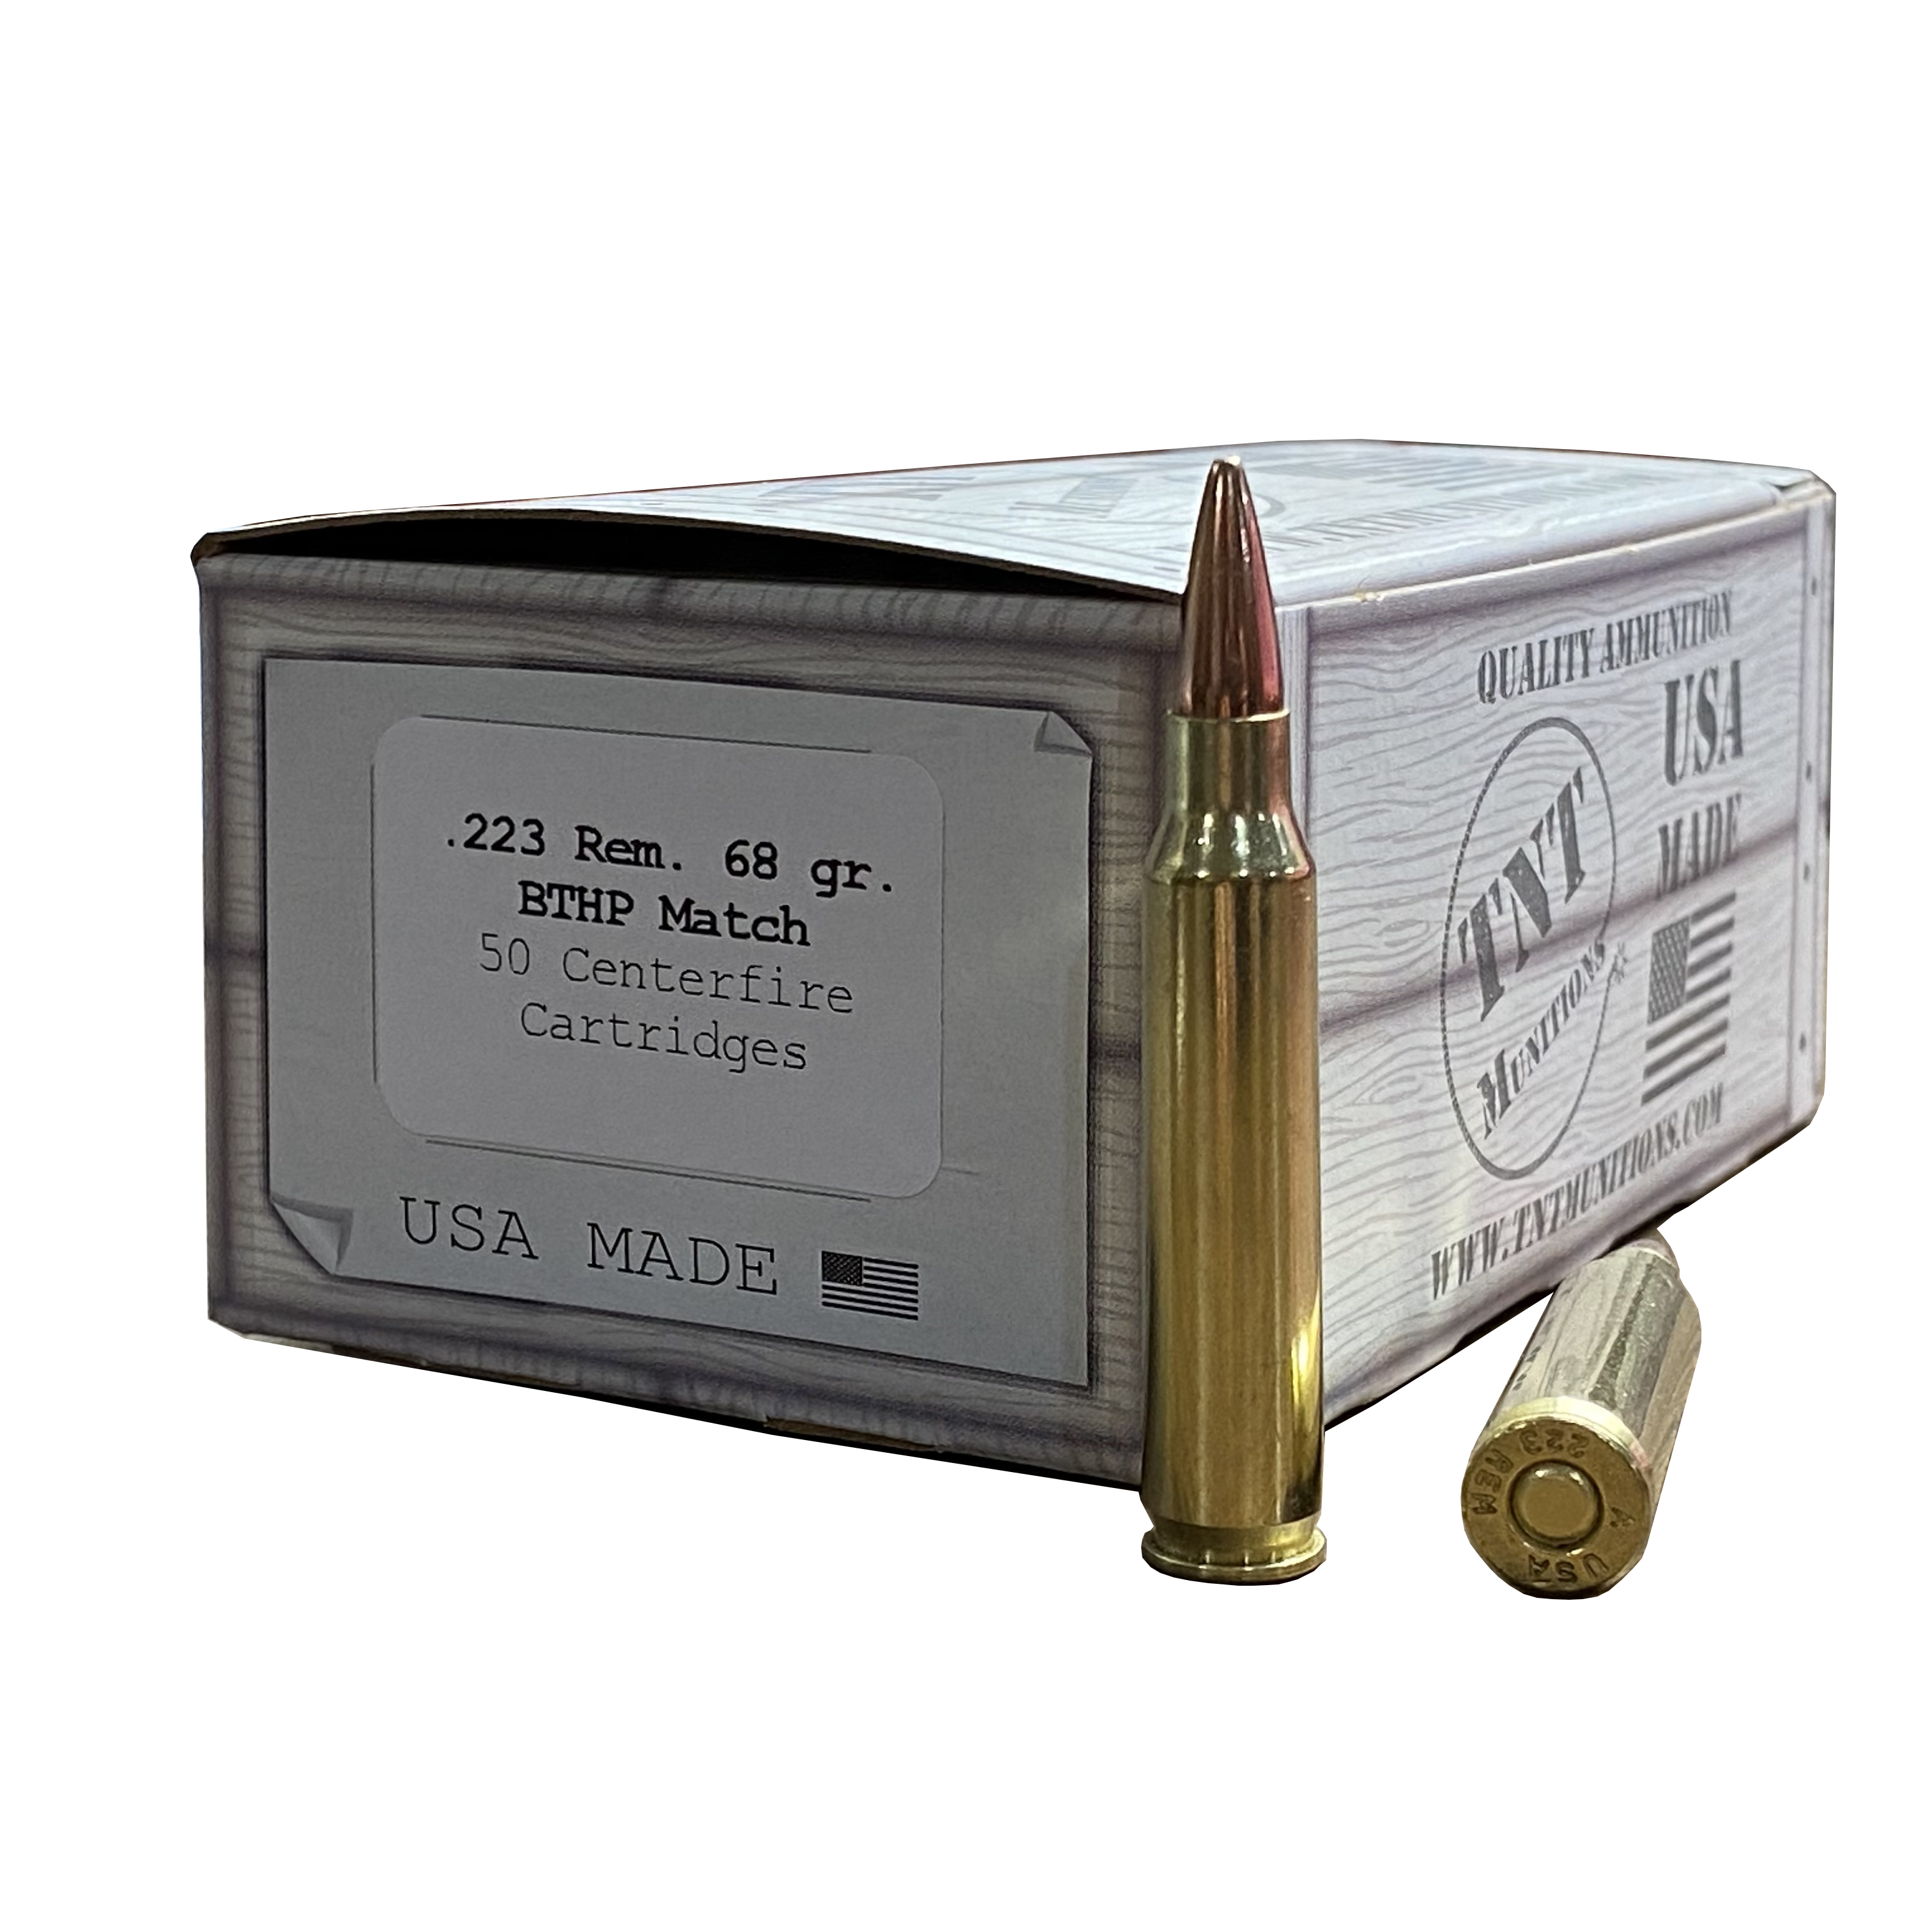 .223 Rem. 68 gr. BTHP Match. MEMORIAL DAY SALE! THROUGH MAY 29TH ONLY - SHIPS NBD